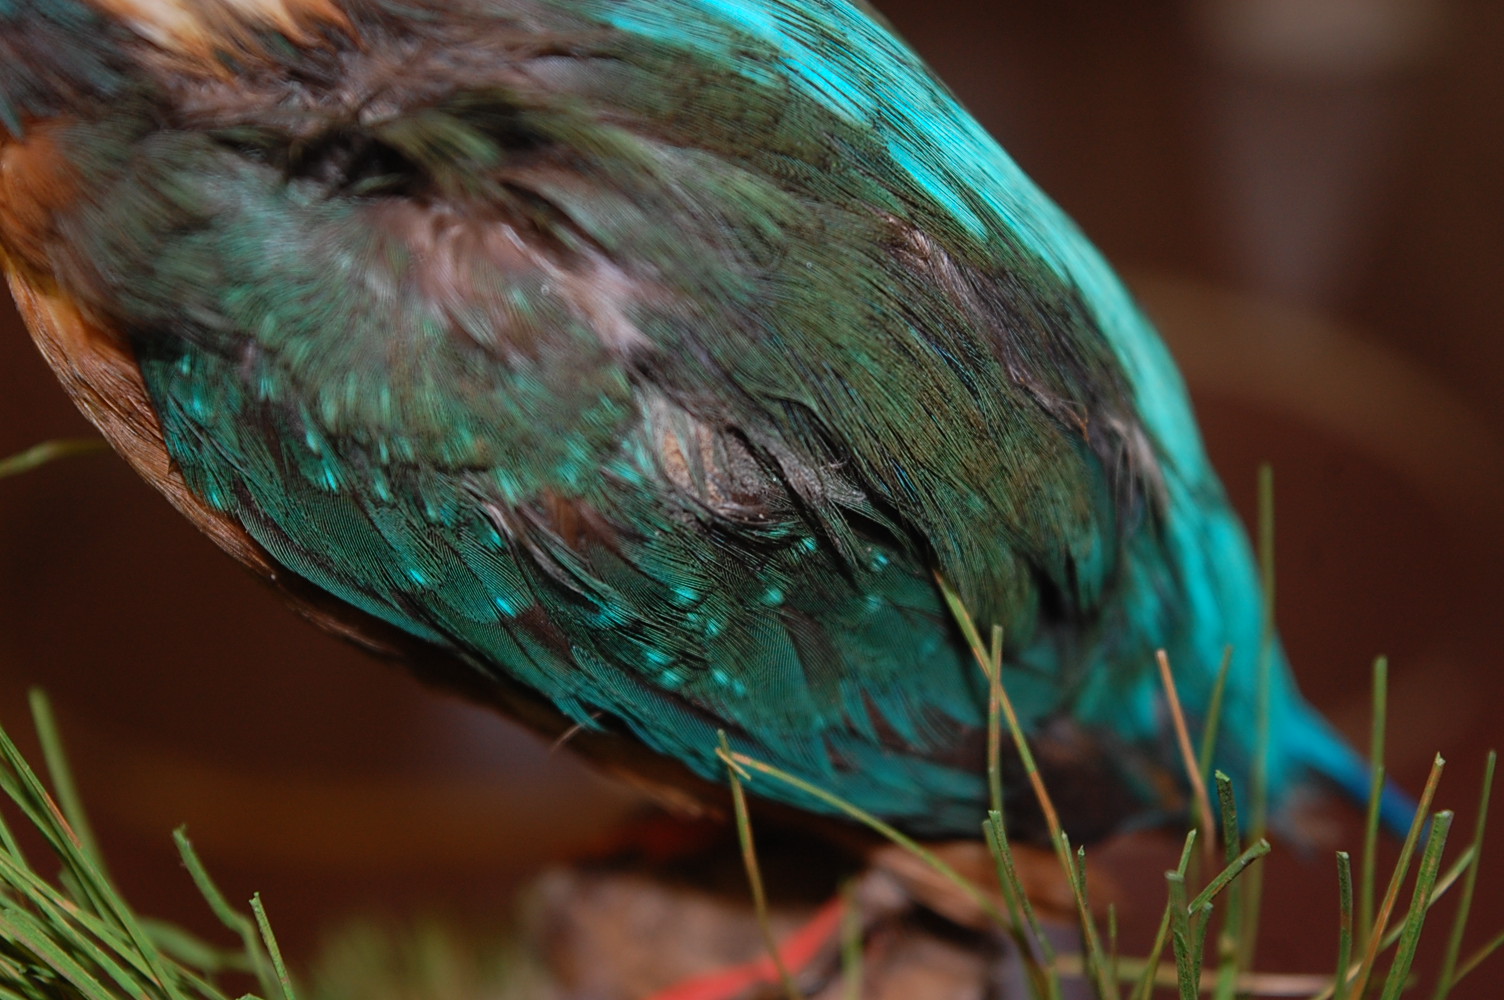 A taxidermy Kingfisher (Alcedo atthis) mounted on a branch, beneath a glass dome, on a painted - Image 6 of 7